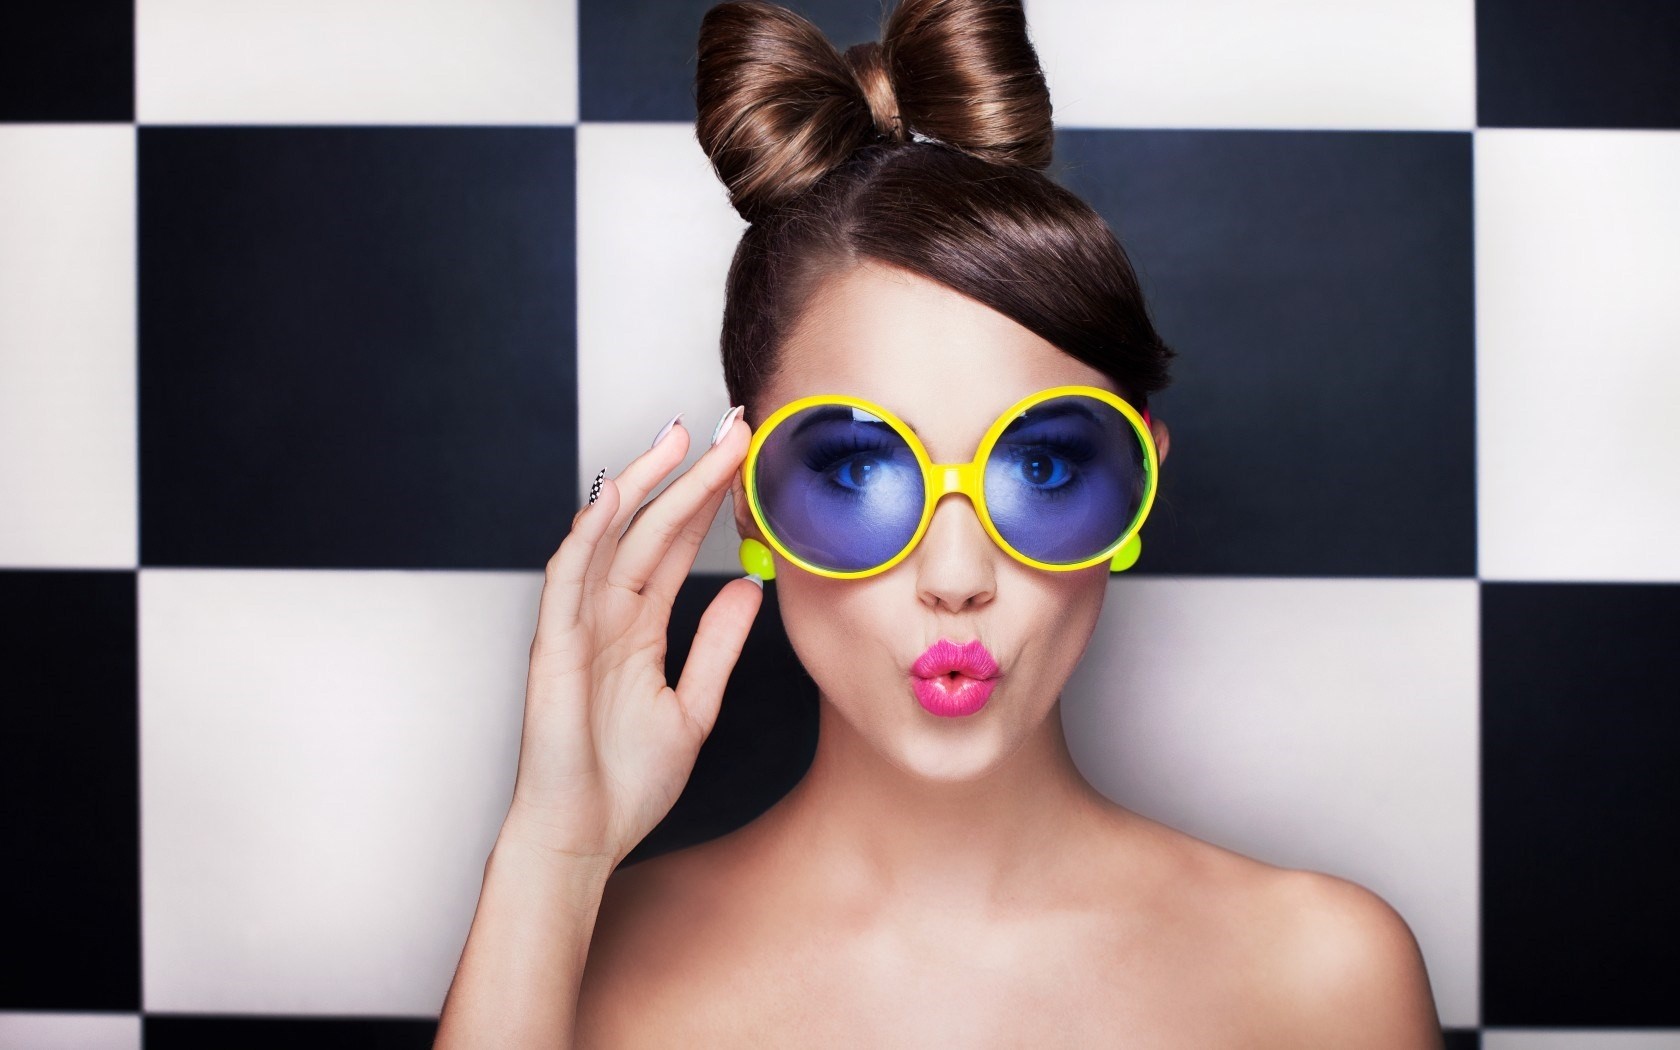 People 1680x1050 women face lips pouting brunette pink lipstick women with shades sunglasses makeup painted nails women indoors indoors model looking at viewer bare shoulders closeup